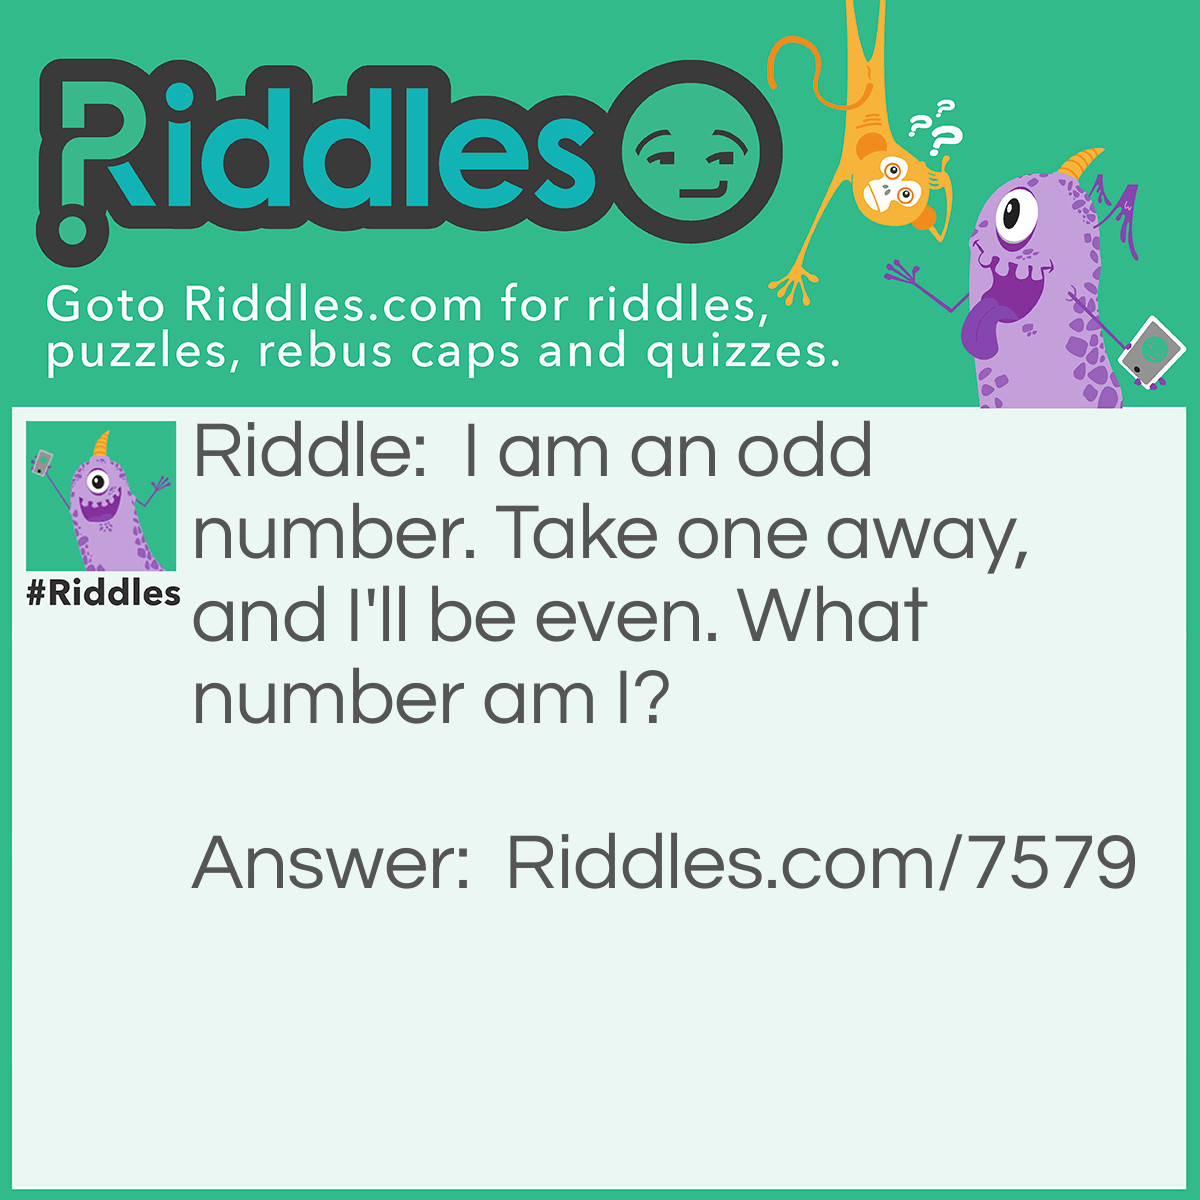 Riddle: I am an odd number. Take one away, and I'll be even. What number am I? Answer: 7 (sEVEN